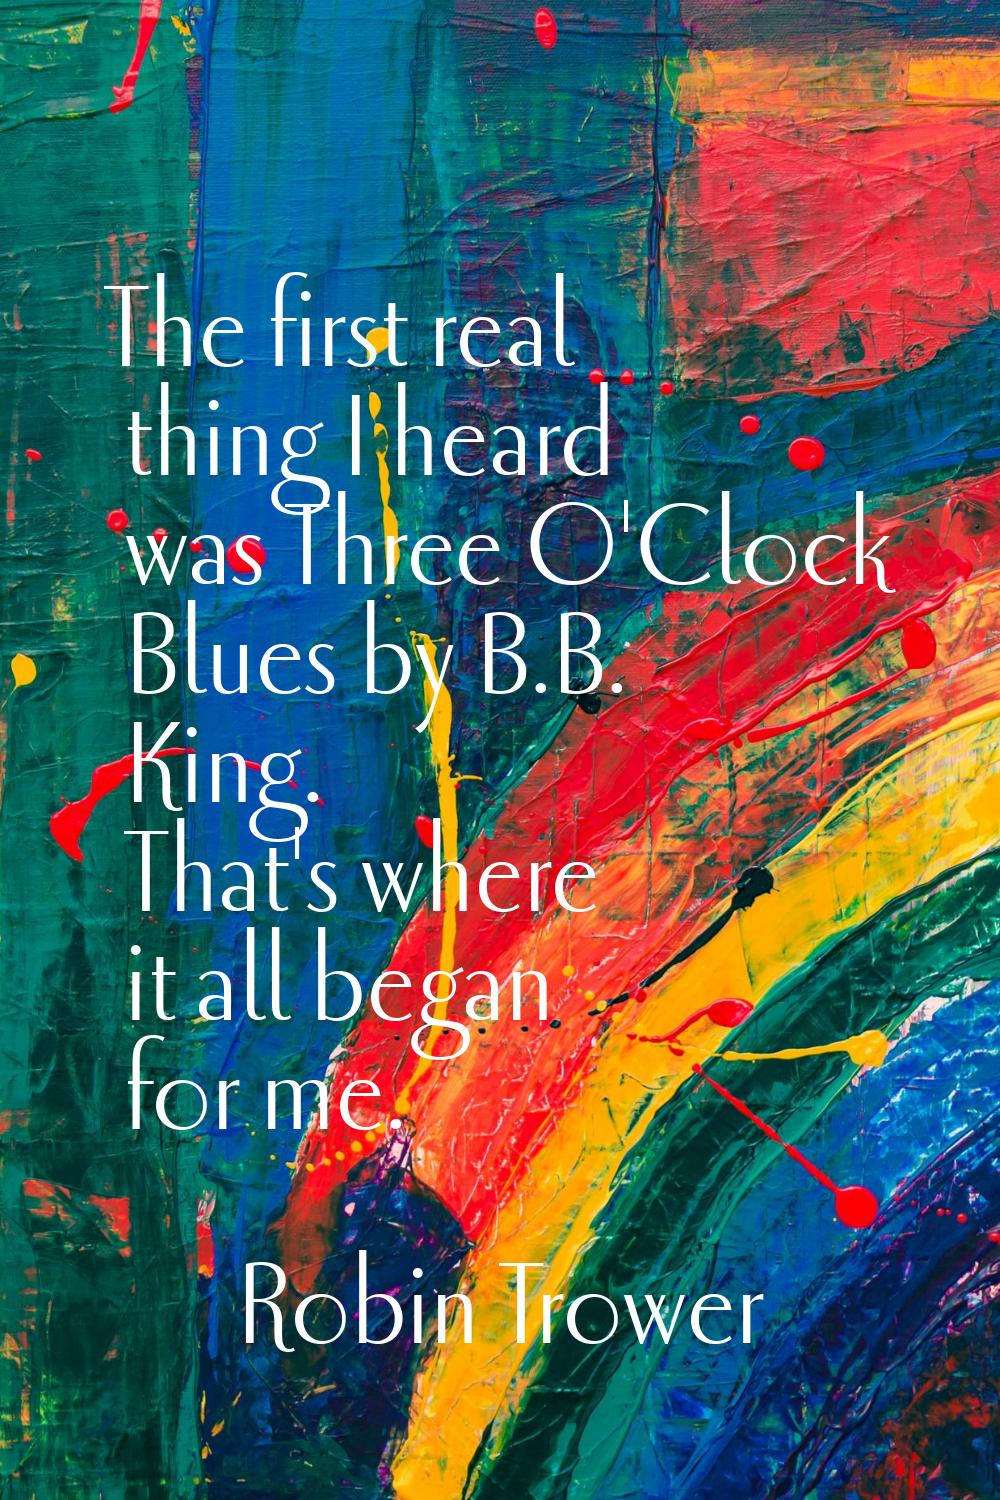 The first real thing I heard was Three O'Clock Blues by B.B. King. That's where it all began for me